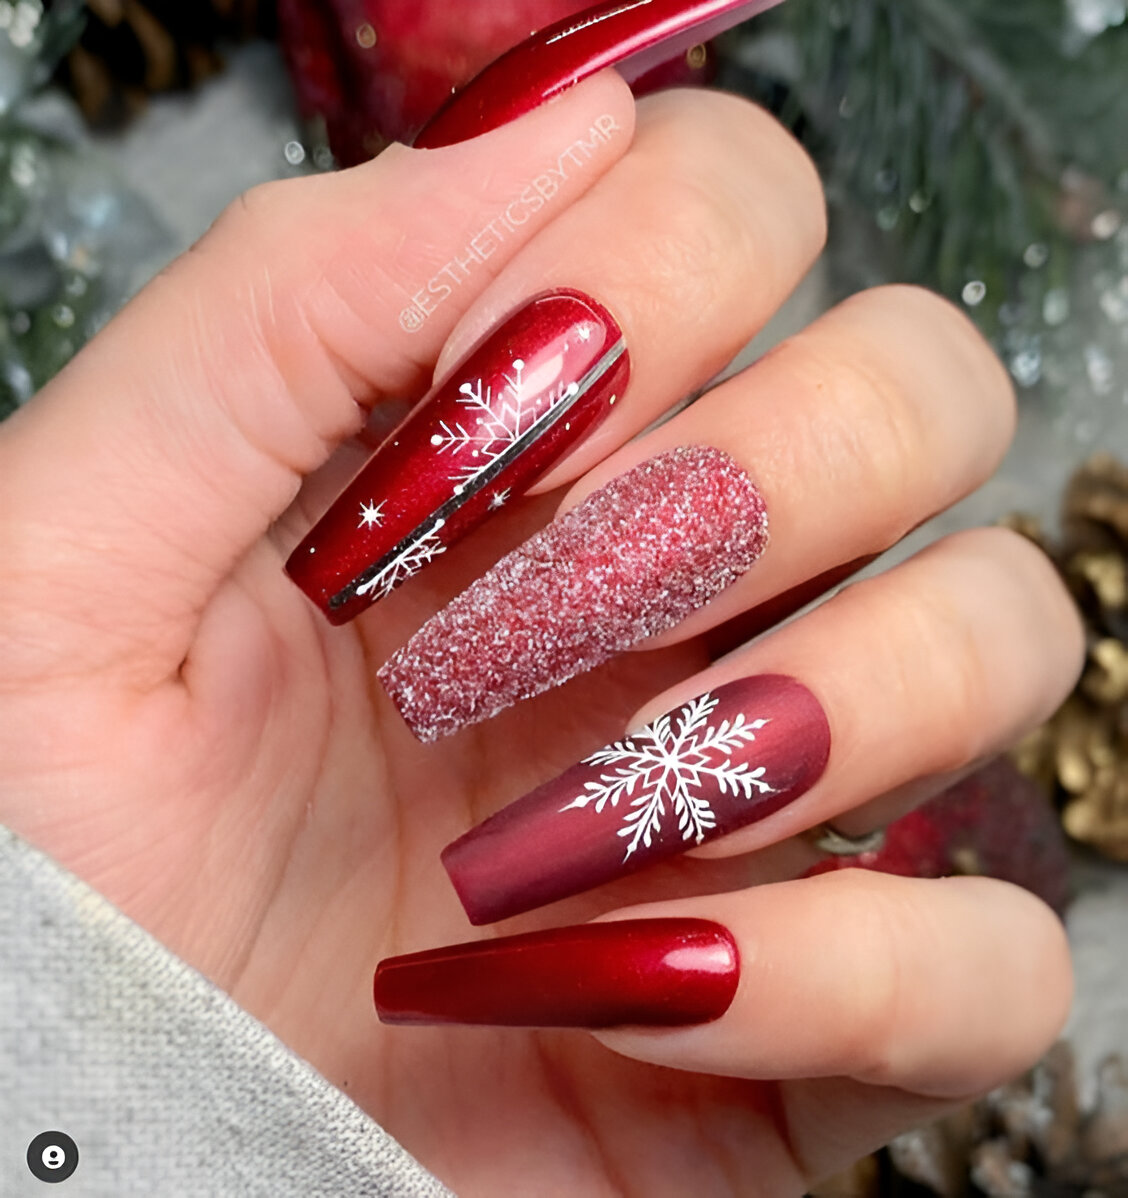 Red Nails With Snow Design